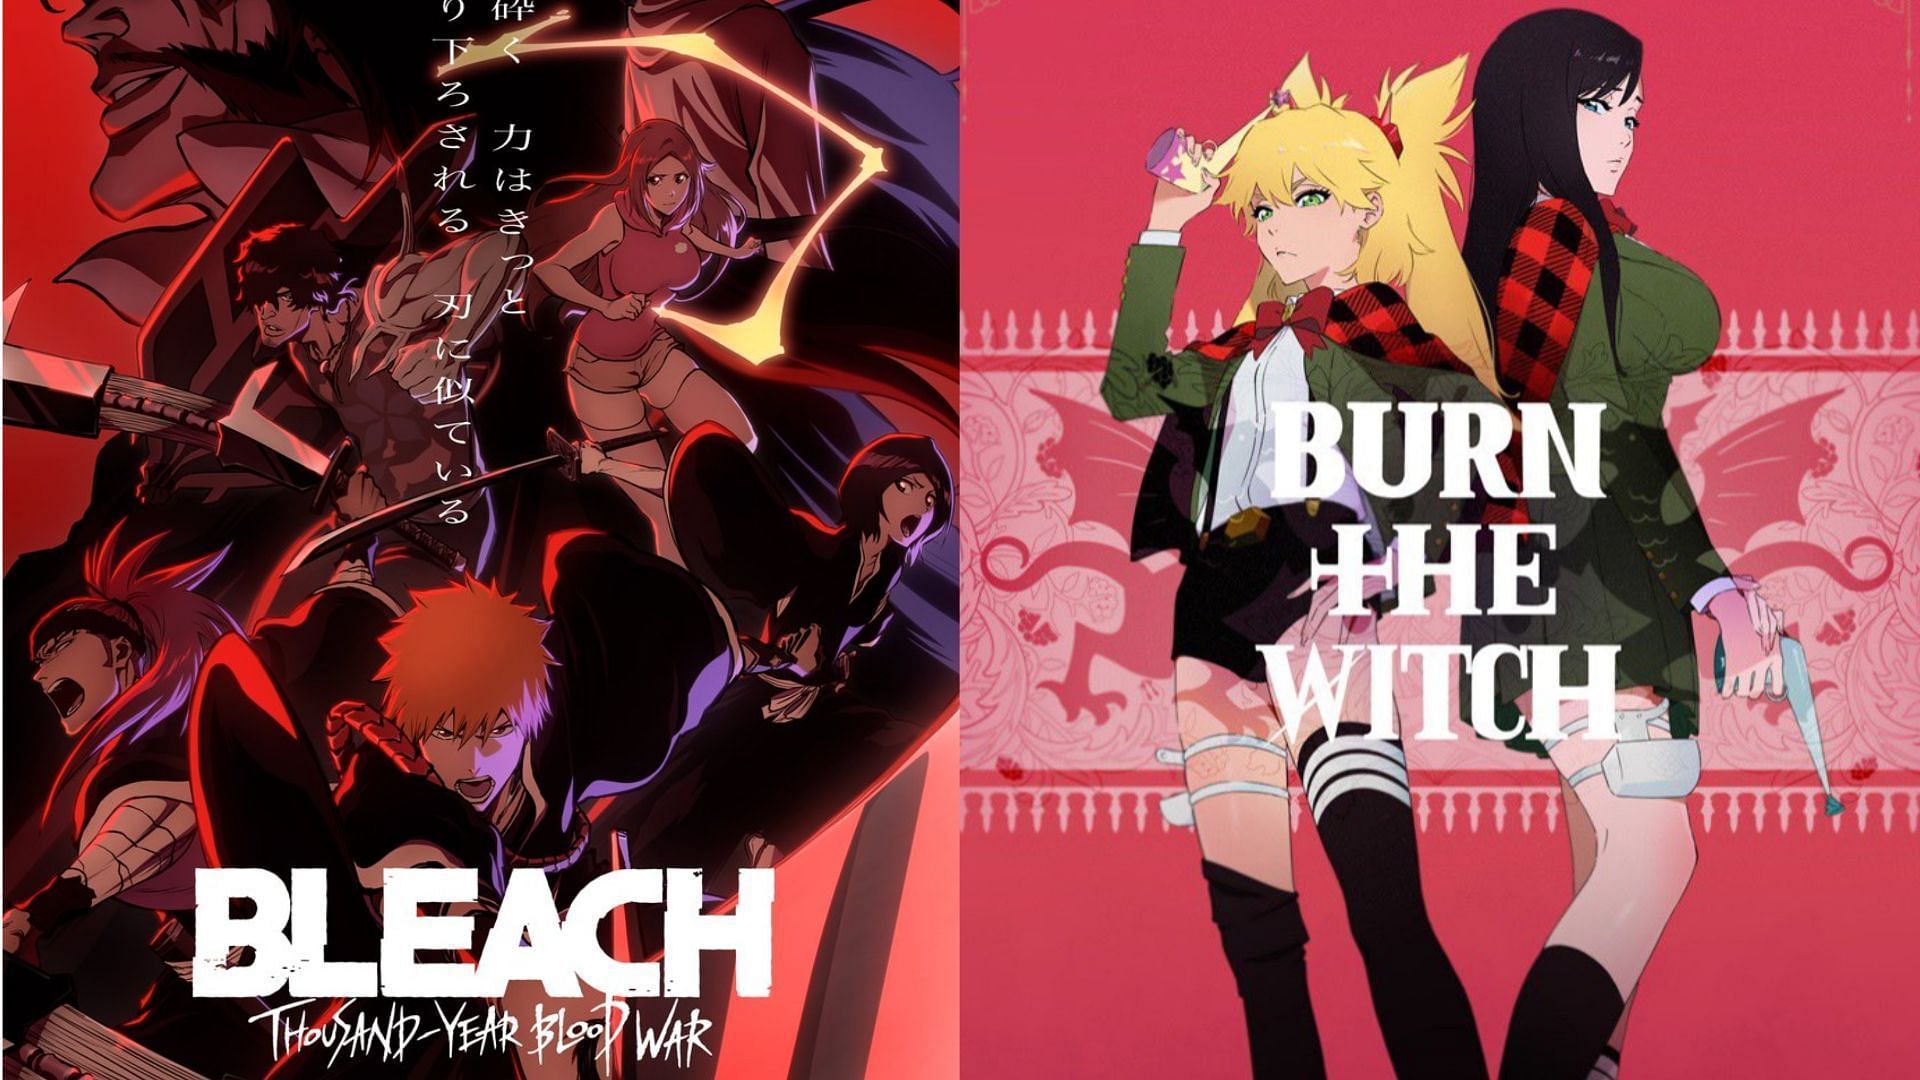 Tite Kubo to reveal new information for Bleach and Burn the Witch 